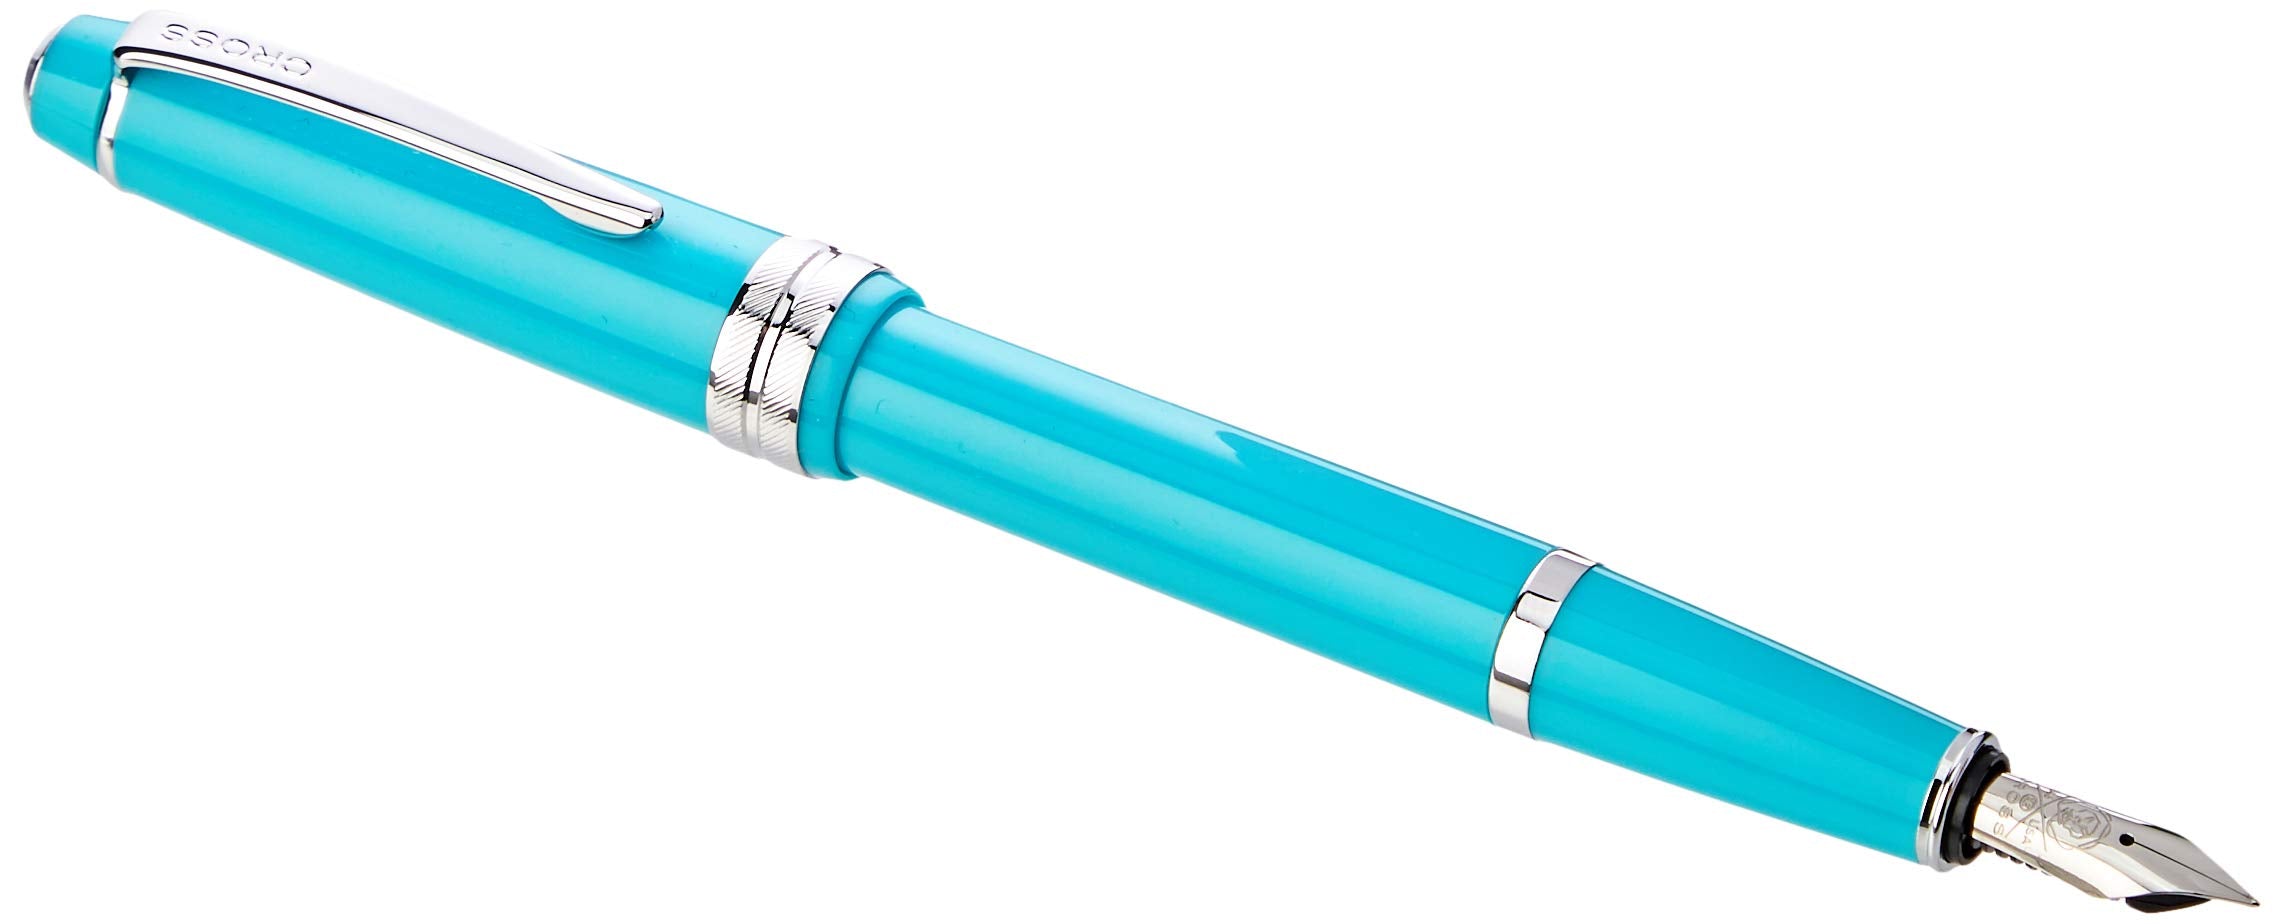 CROSS Bailey Light Polished Resin Refillable Fountain Pen, Extra-Fine Nib, Includes Premium Gift Box - Teal  - Like New